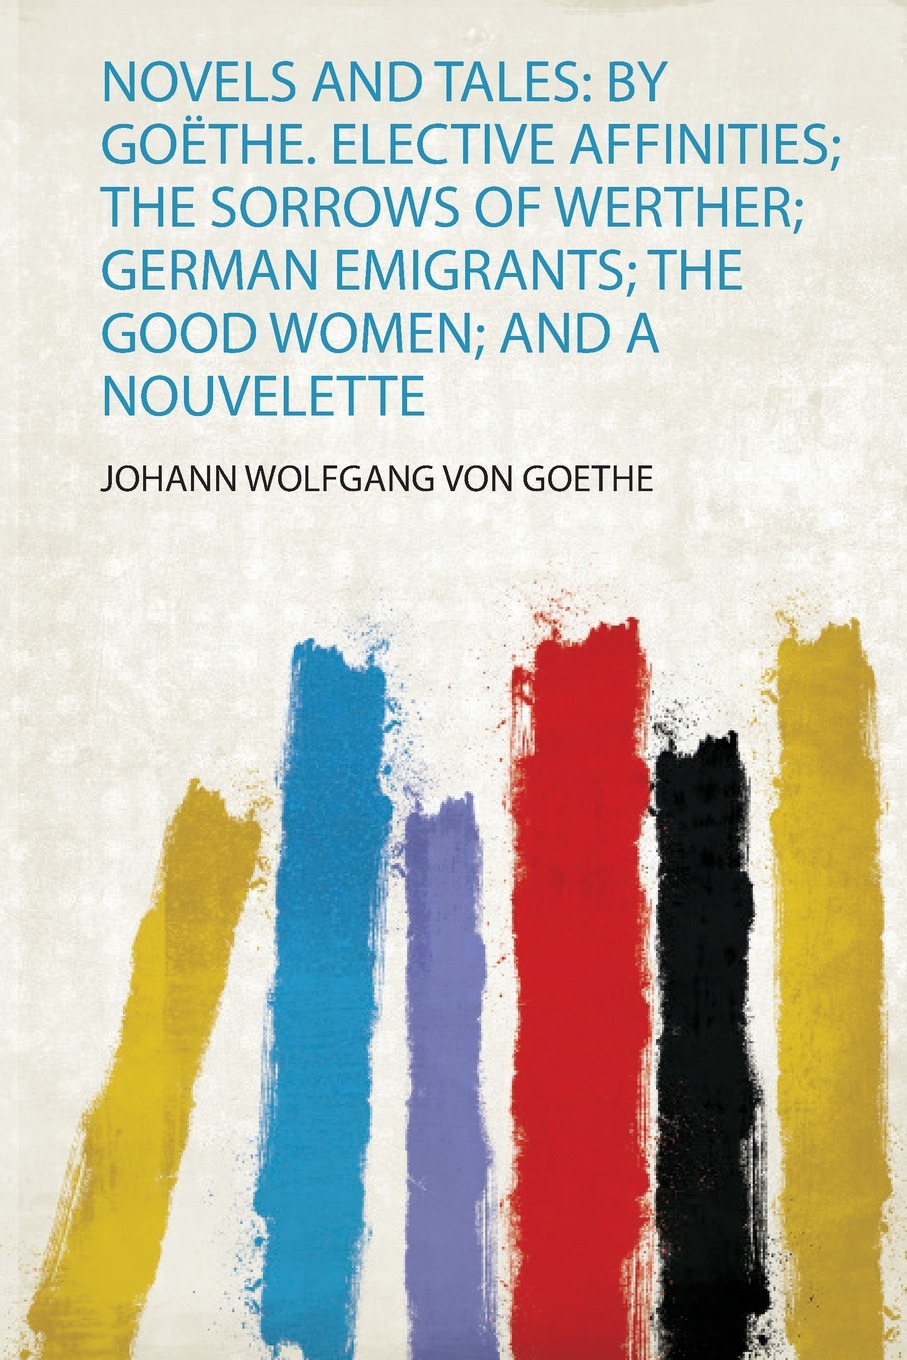 Novels and Tales. by Goethe. Elective Affinities; the Sorrows of Werther; German Emigrants; the Good Women; and a Nouvelette